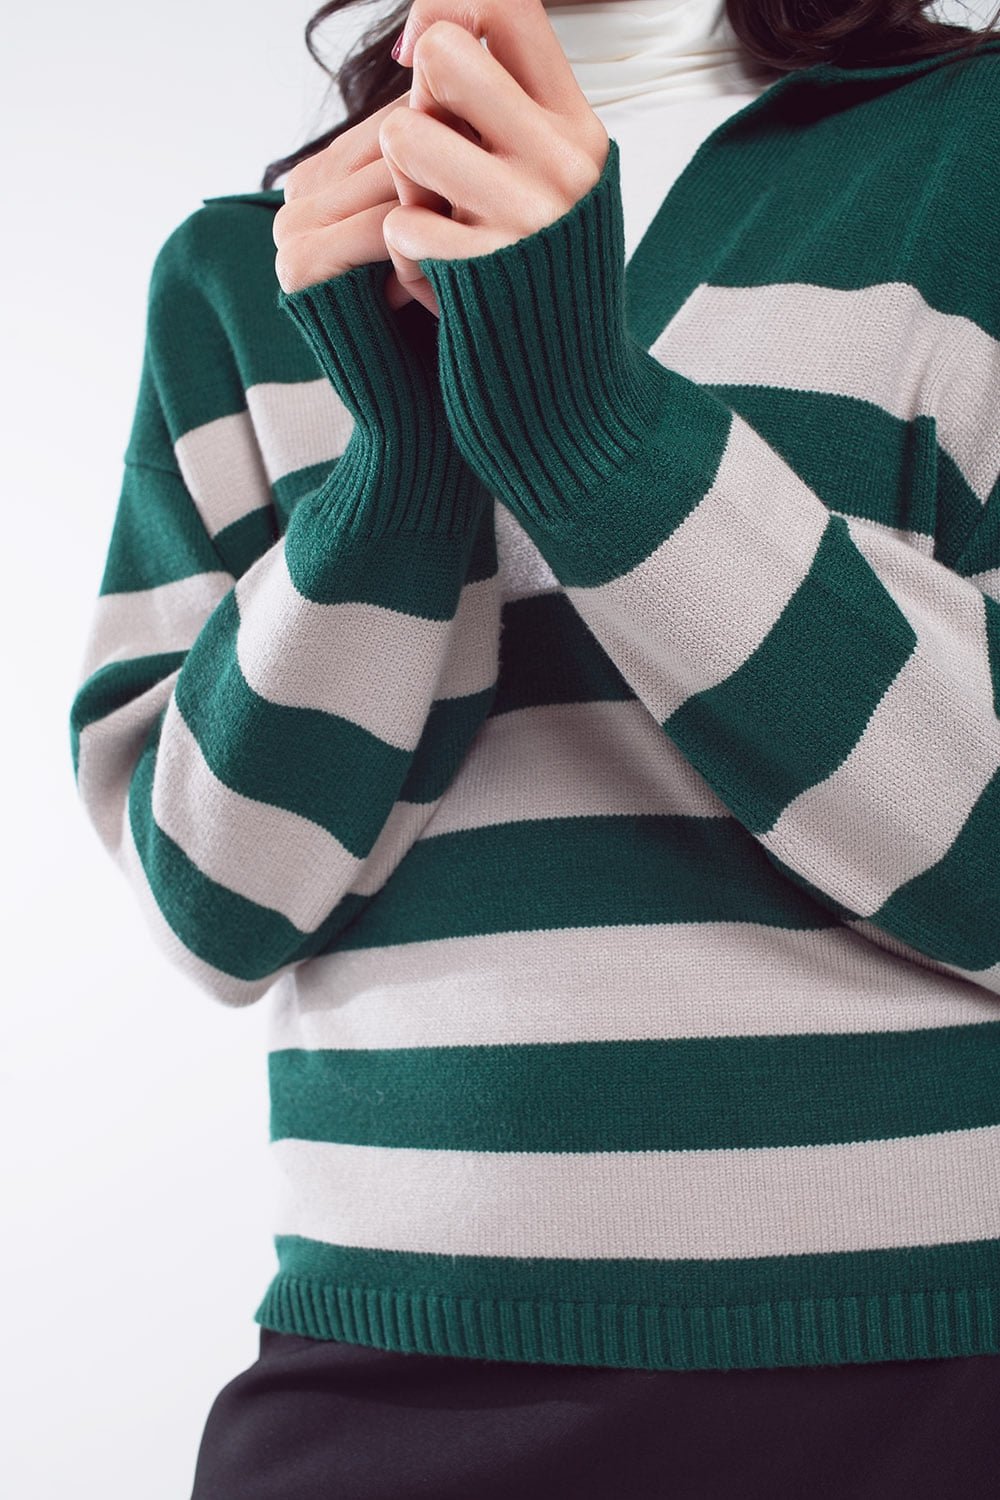 Green and White Striped Sweater With v Neck and Polo Collar - Mack & Harvie